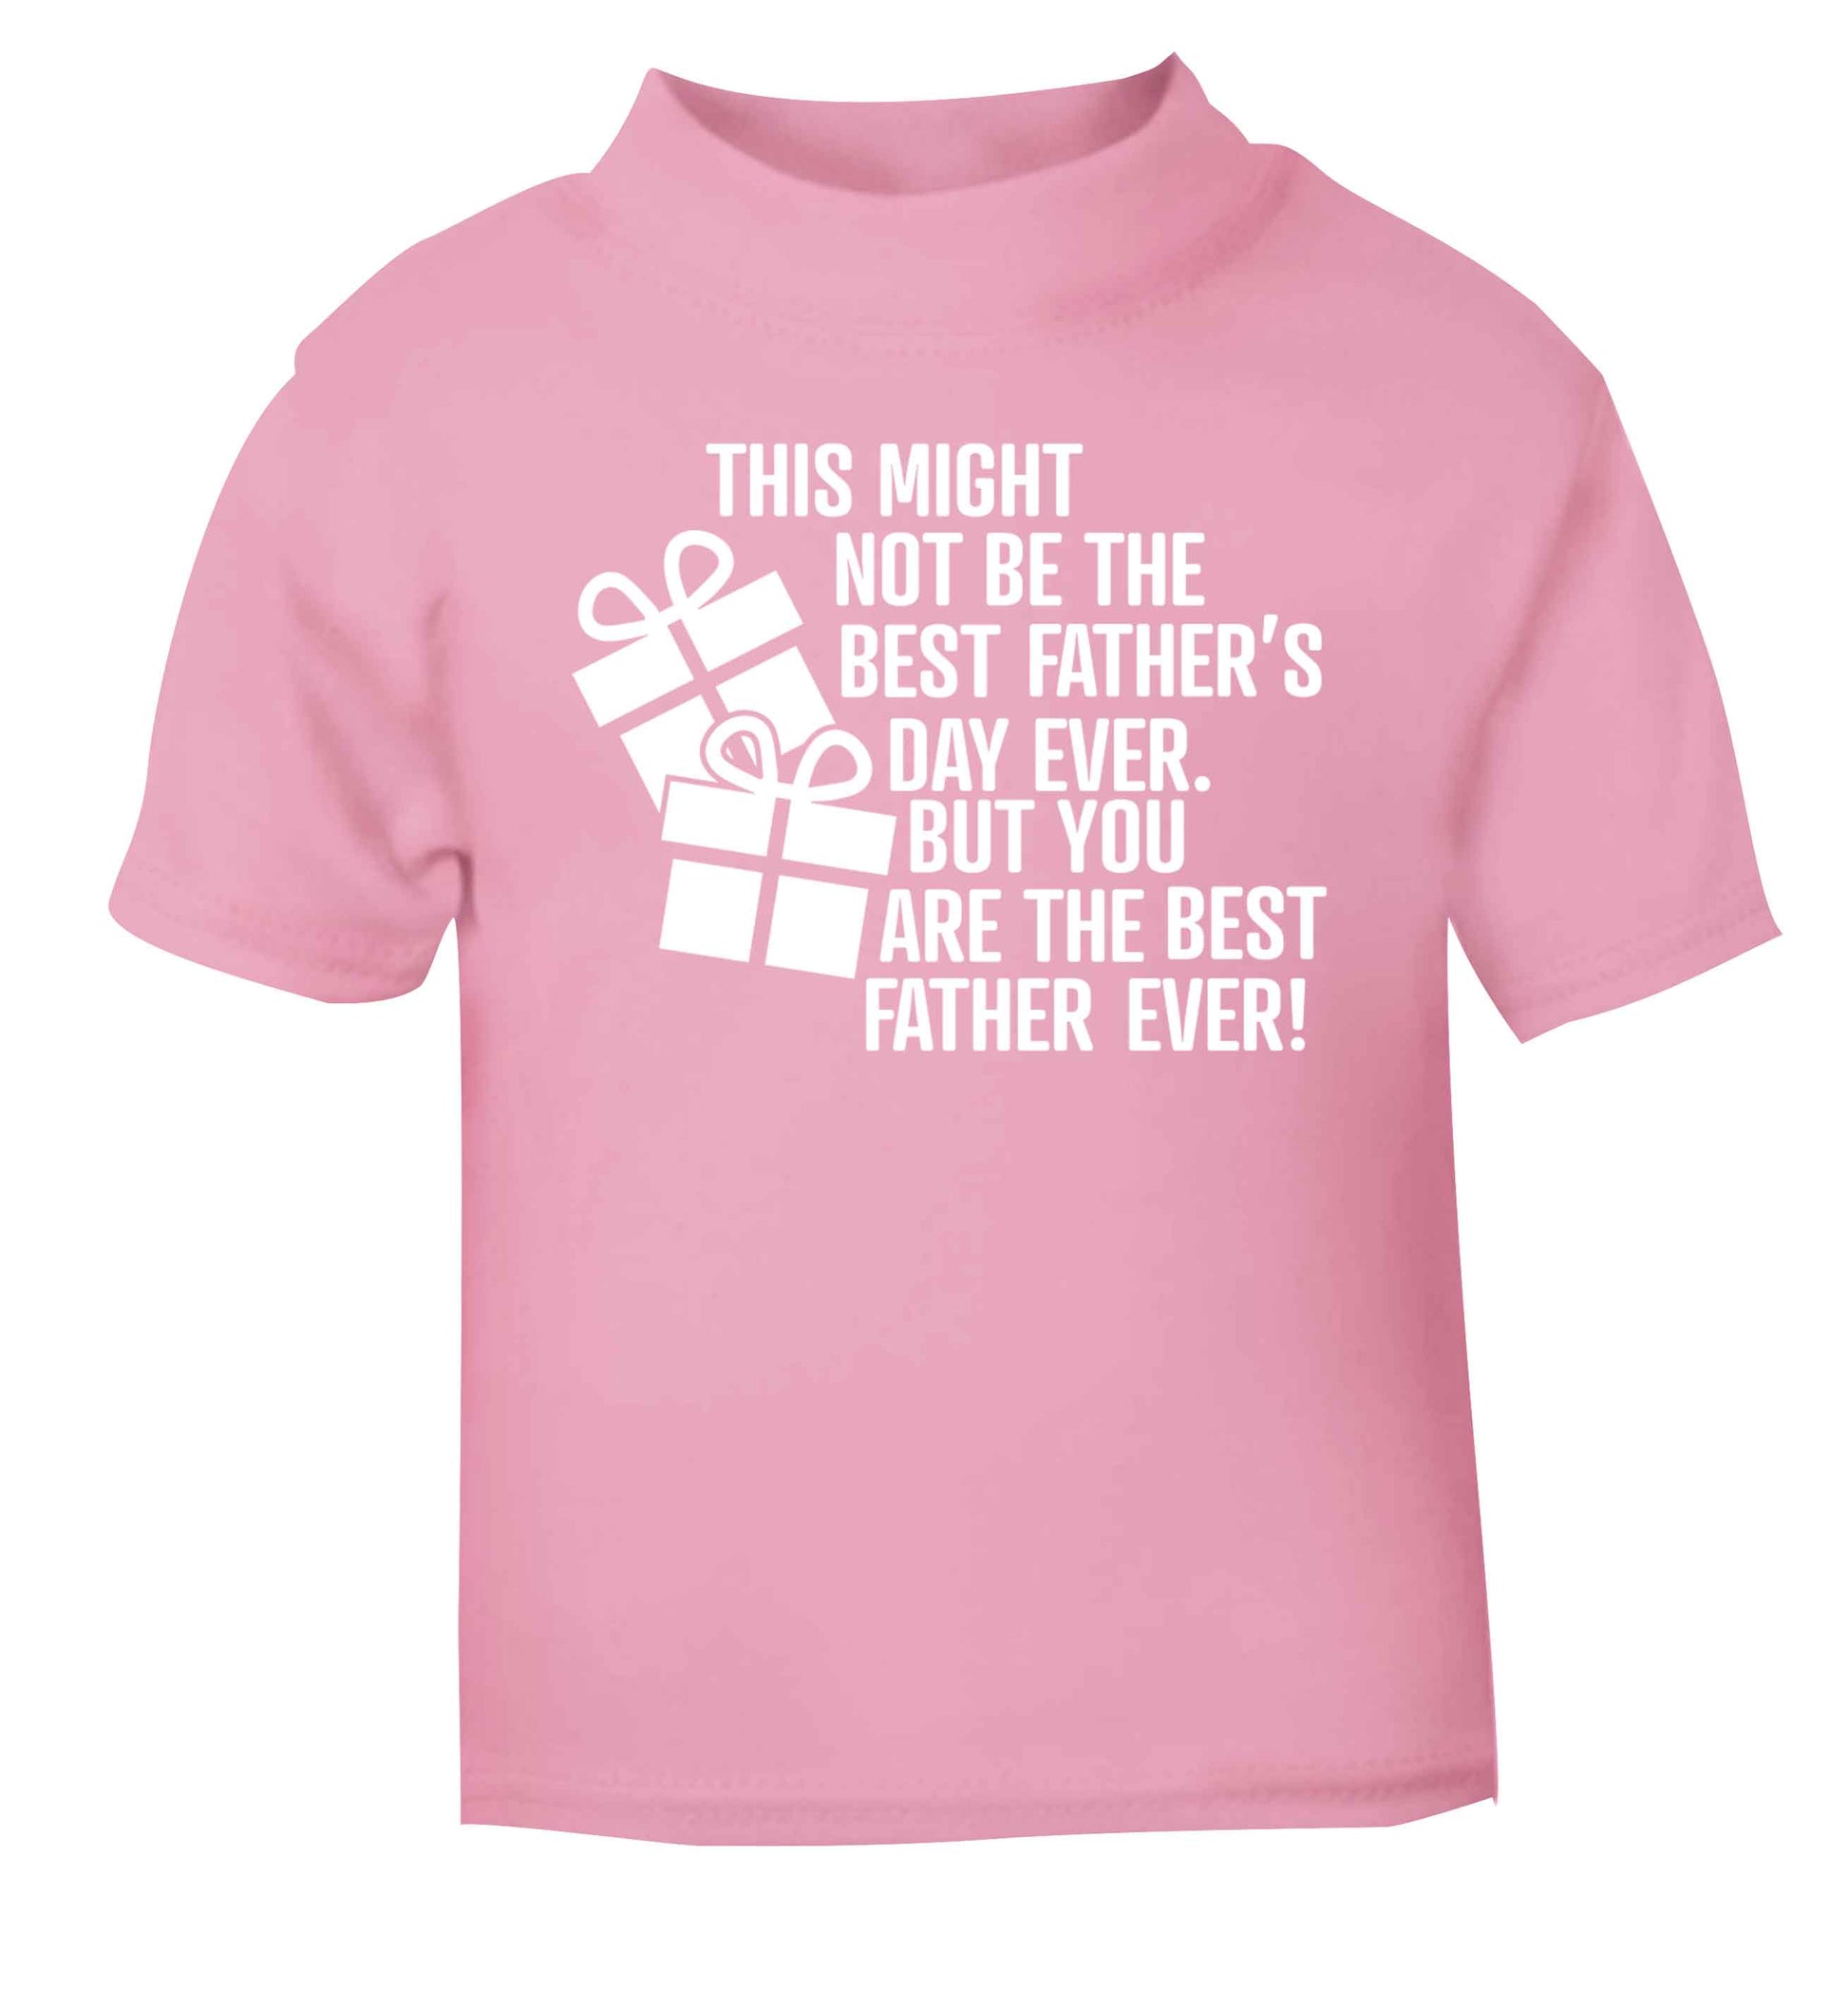 It might not be the best Father's Day ever but you are the best father ever! light pink baby toddler Tshirt 2 Years